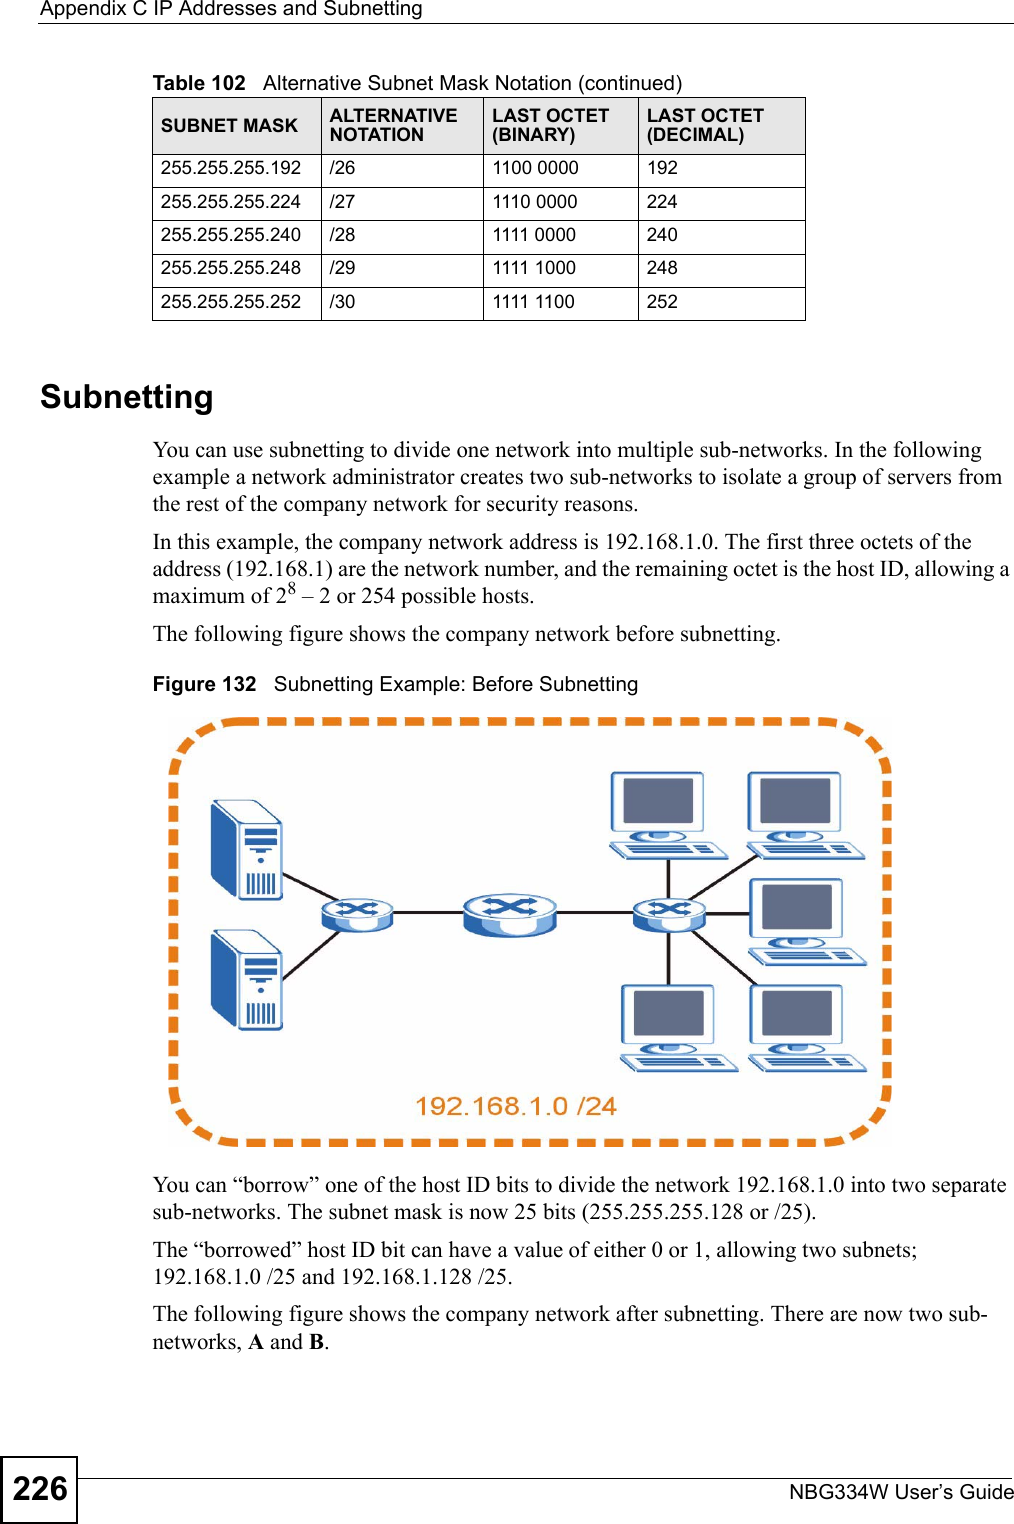 Appendix C IP Addresses and SubnettingNBG334W User’s Guide226SubnettingYou can use subnetting to divide one network into multiple sub-networks. In the following example a network administrator creates two sub-networks to isolate a group of servers from the rest of the company network for security reasons.In this example, the company network address is 192.168.1.0. The first three octets of the address (192.168.1) are the network number, and the remaining octet is the host ID, allowing a maximum of 28 – 2 or 254 possible hosts.The following figure shows the company network before subnetting.  Figure 132   Subnetting Example: Before SubnettingYou can “borrow” one of the host ID bits to divide the network 192.168.1.0 into two separate sub-networks. The subnet mask is now 25 bits (255.255.255.128 or /25).The “borrowed” host ID bit can have a value of either 0 or 1, allowing two subnets; 192.168.1.0 /25 and 192.168.1.128 /25. The following figure shows the company network after subnetting. There are now two sub-networks, A and B. 255.255.255.192 /26 1100 0000 192255.255.255.224 /27 1110 0000 224255.255.255.240 /28 1111 0000 240255.255.255.248 /29 1111 1000 248255.255.255.252 /30 1111 1100 252Table 102   Alternative Subnet Mask Notation (continued)SUBNET MASK ALTERNATIVE NOTATIONLAST OCTET (BINARY)LAST OCTET (DECIMAL)